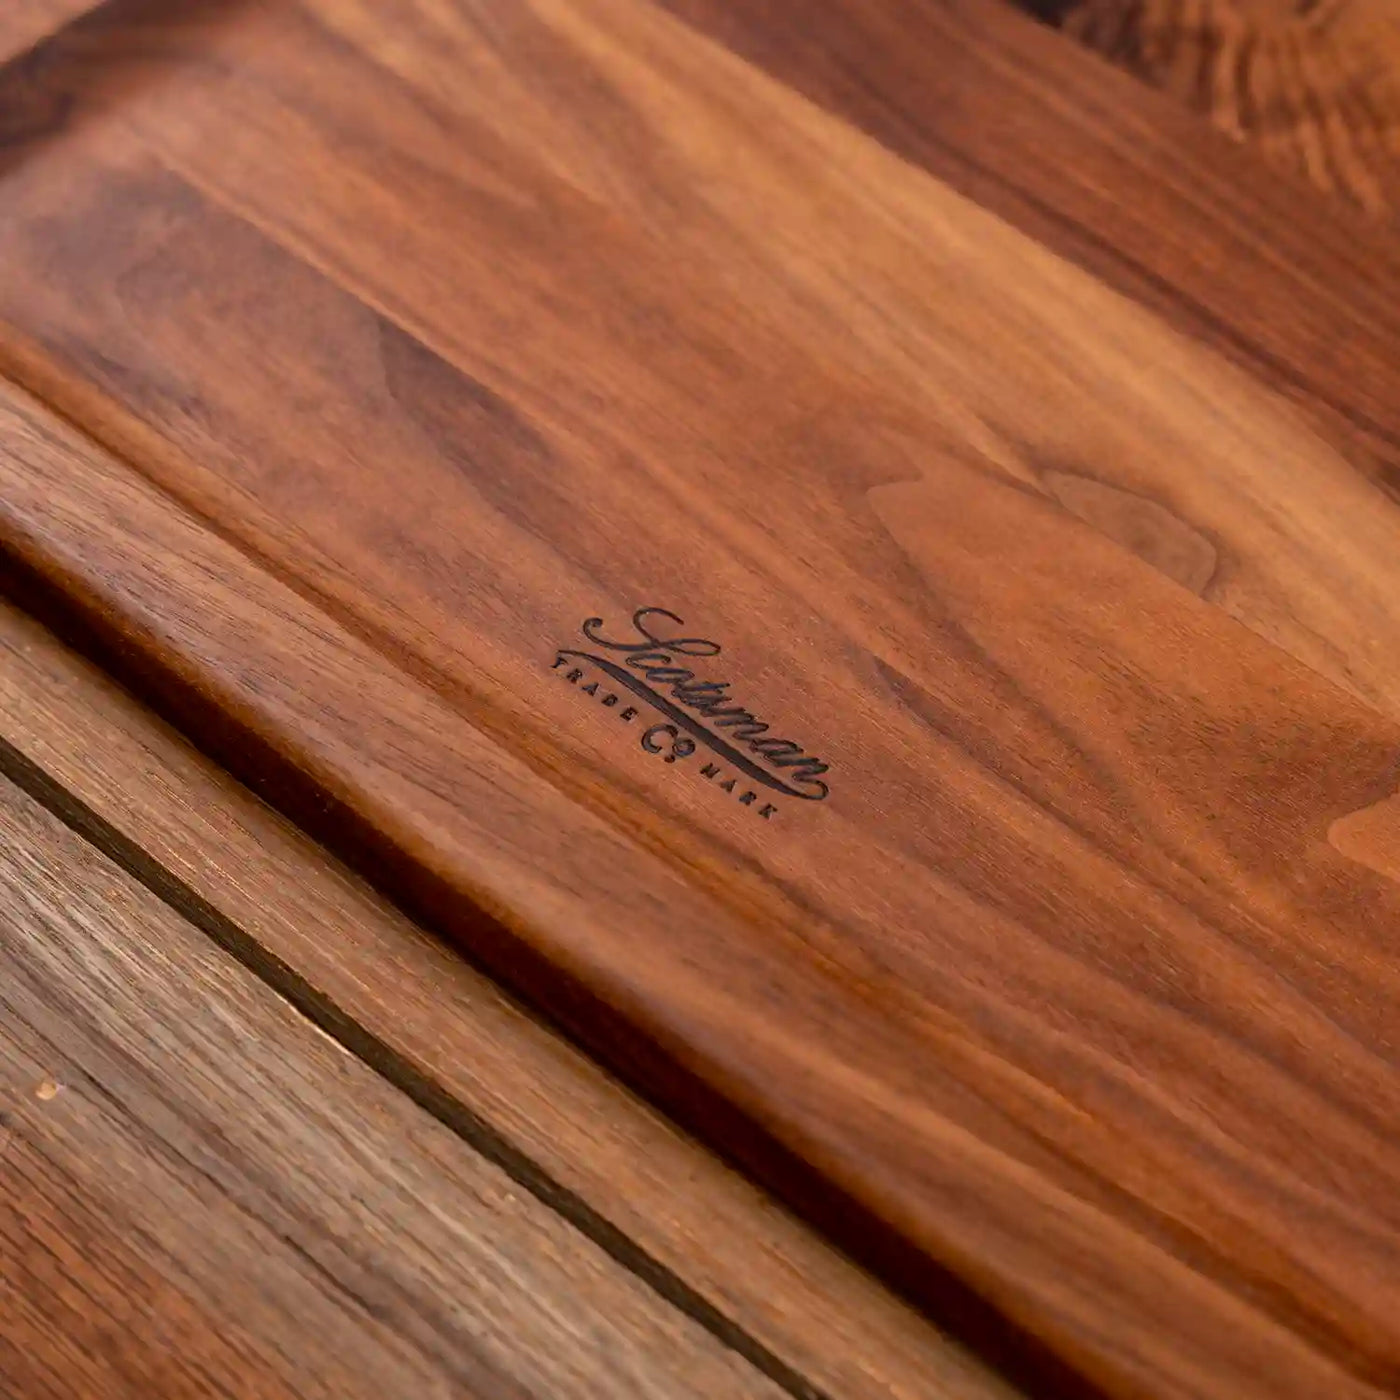 Walnut Barbecue Board with handles. Close up of Scotsman logo.